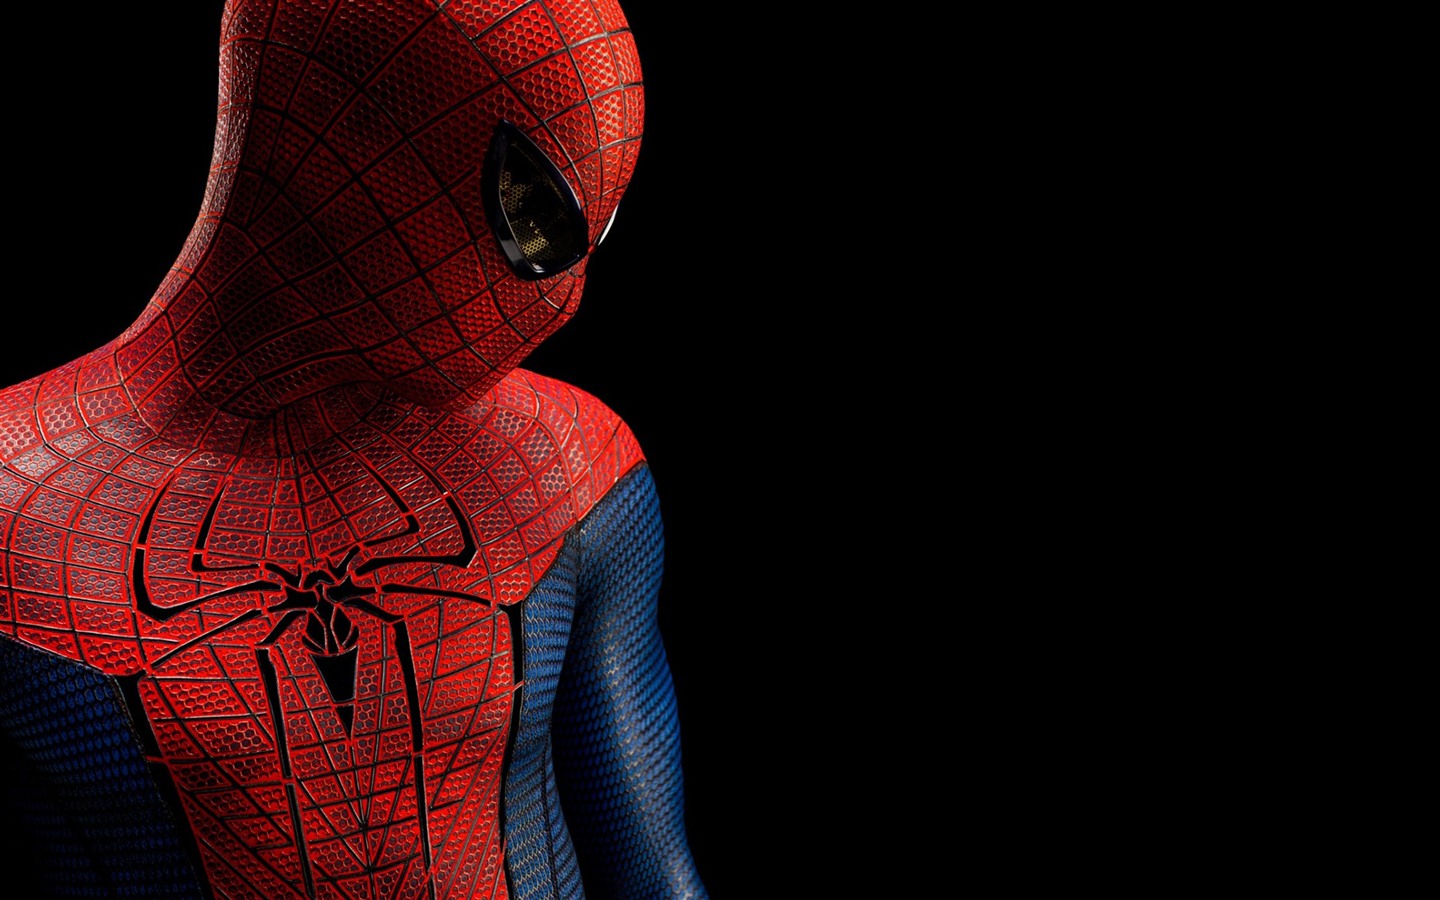 The Amazing Spider-Man 2012 wallpapers #14 - 1440x900